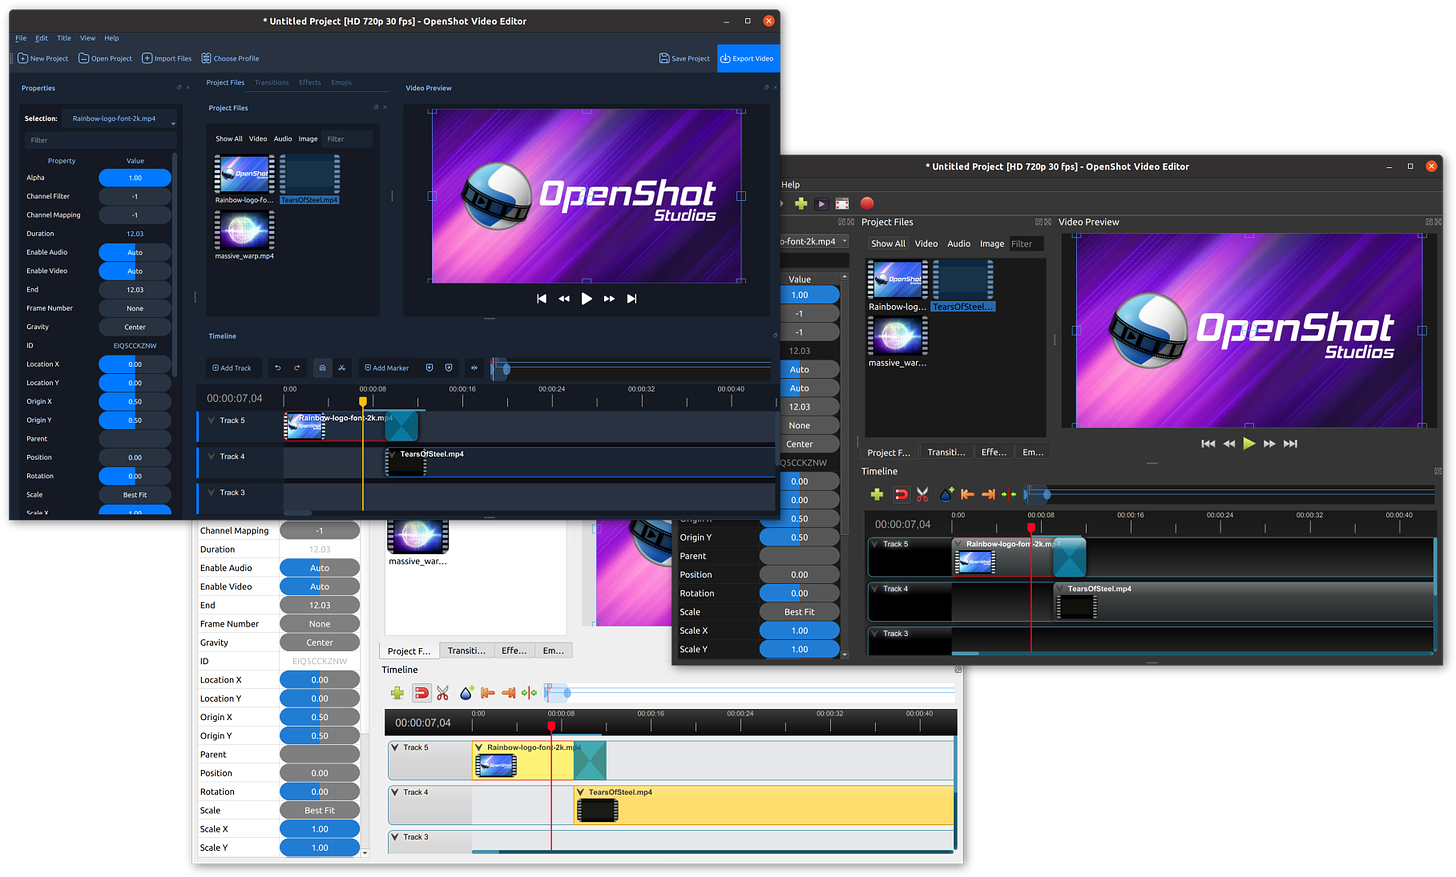 OpenShot 3.2.0 Released | New Themes, Enhanced Timeline, and Improved Performance!